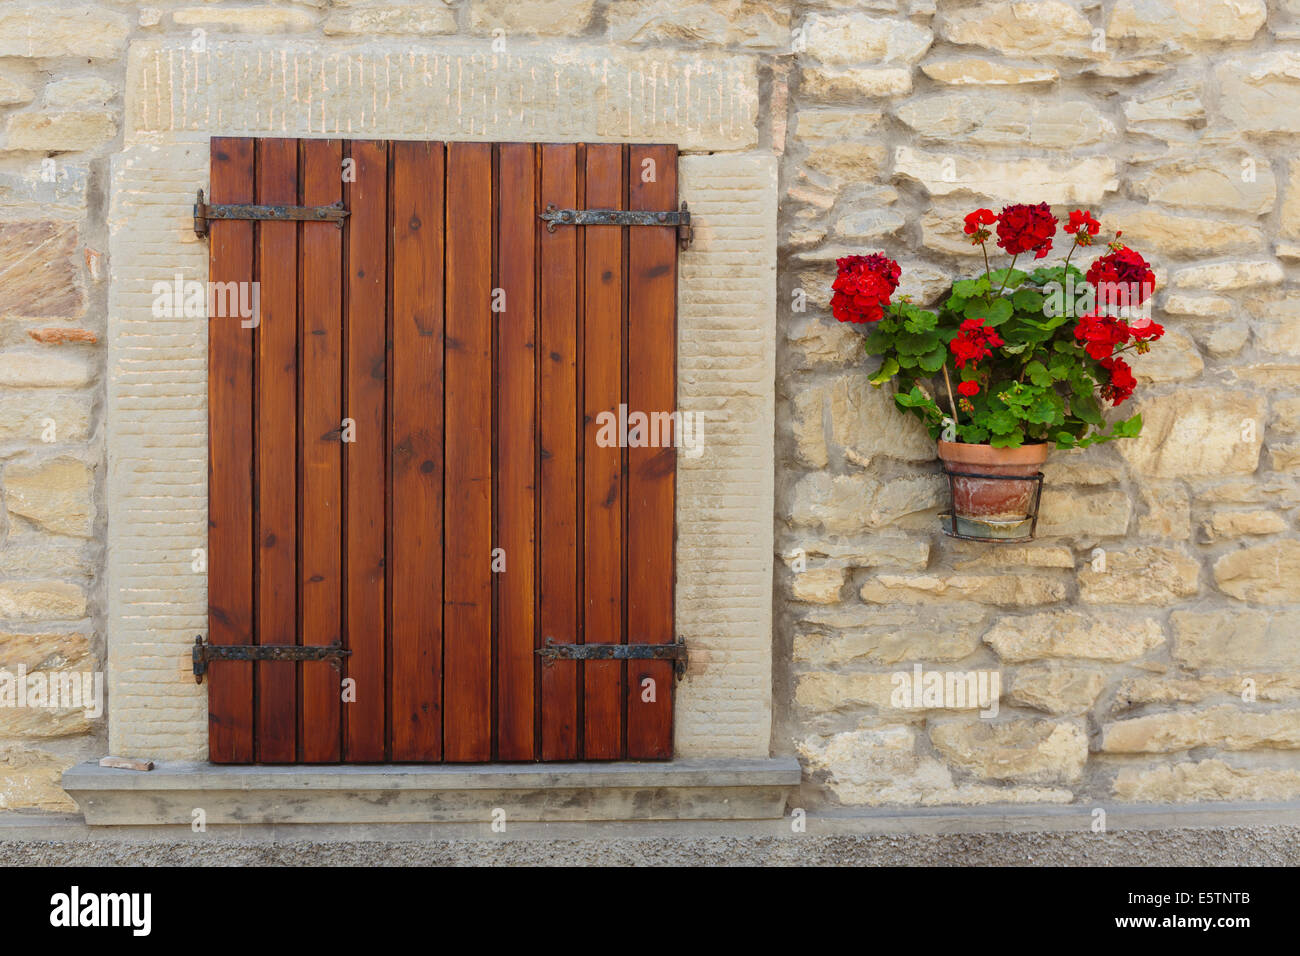 Window in an old house decorated with flower pots and flowers Stock Photo